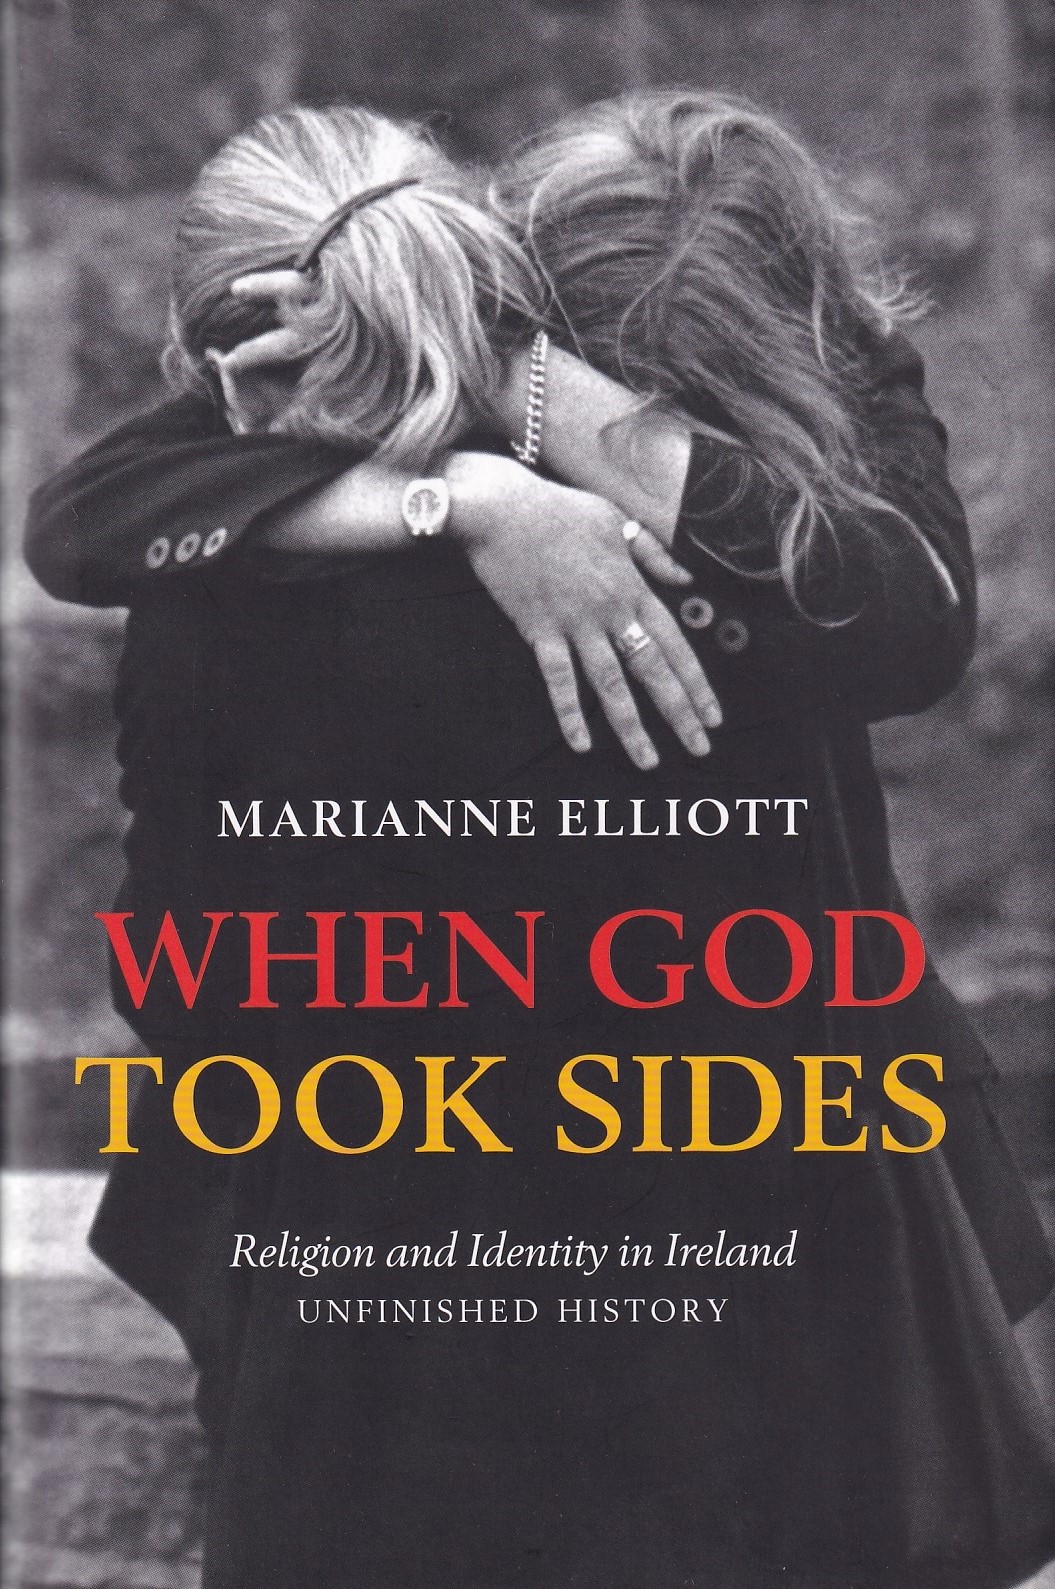 When God Took Sides: Religion and Identity in Irish History: Unfinished History by Marianne Elliott